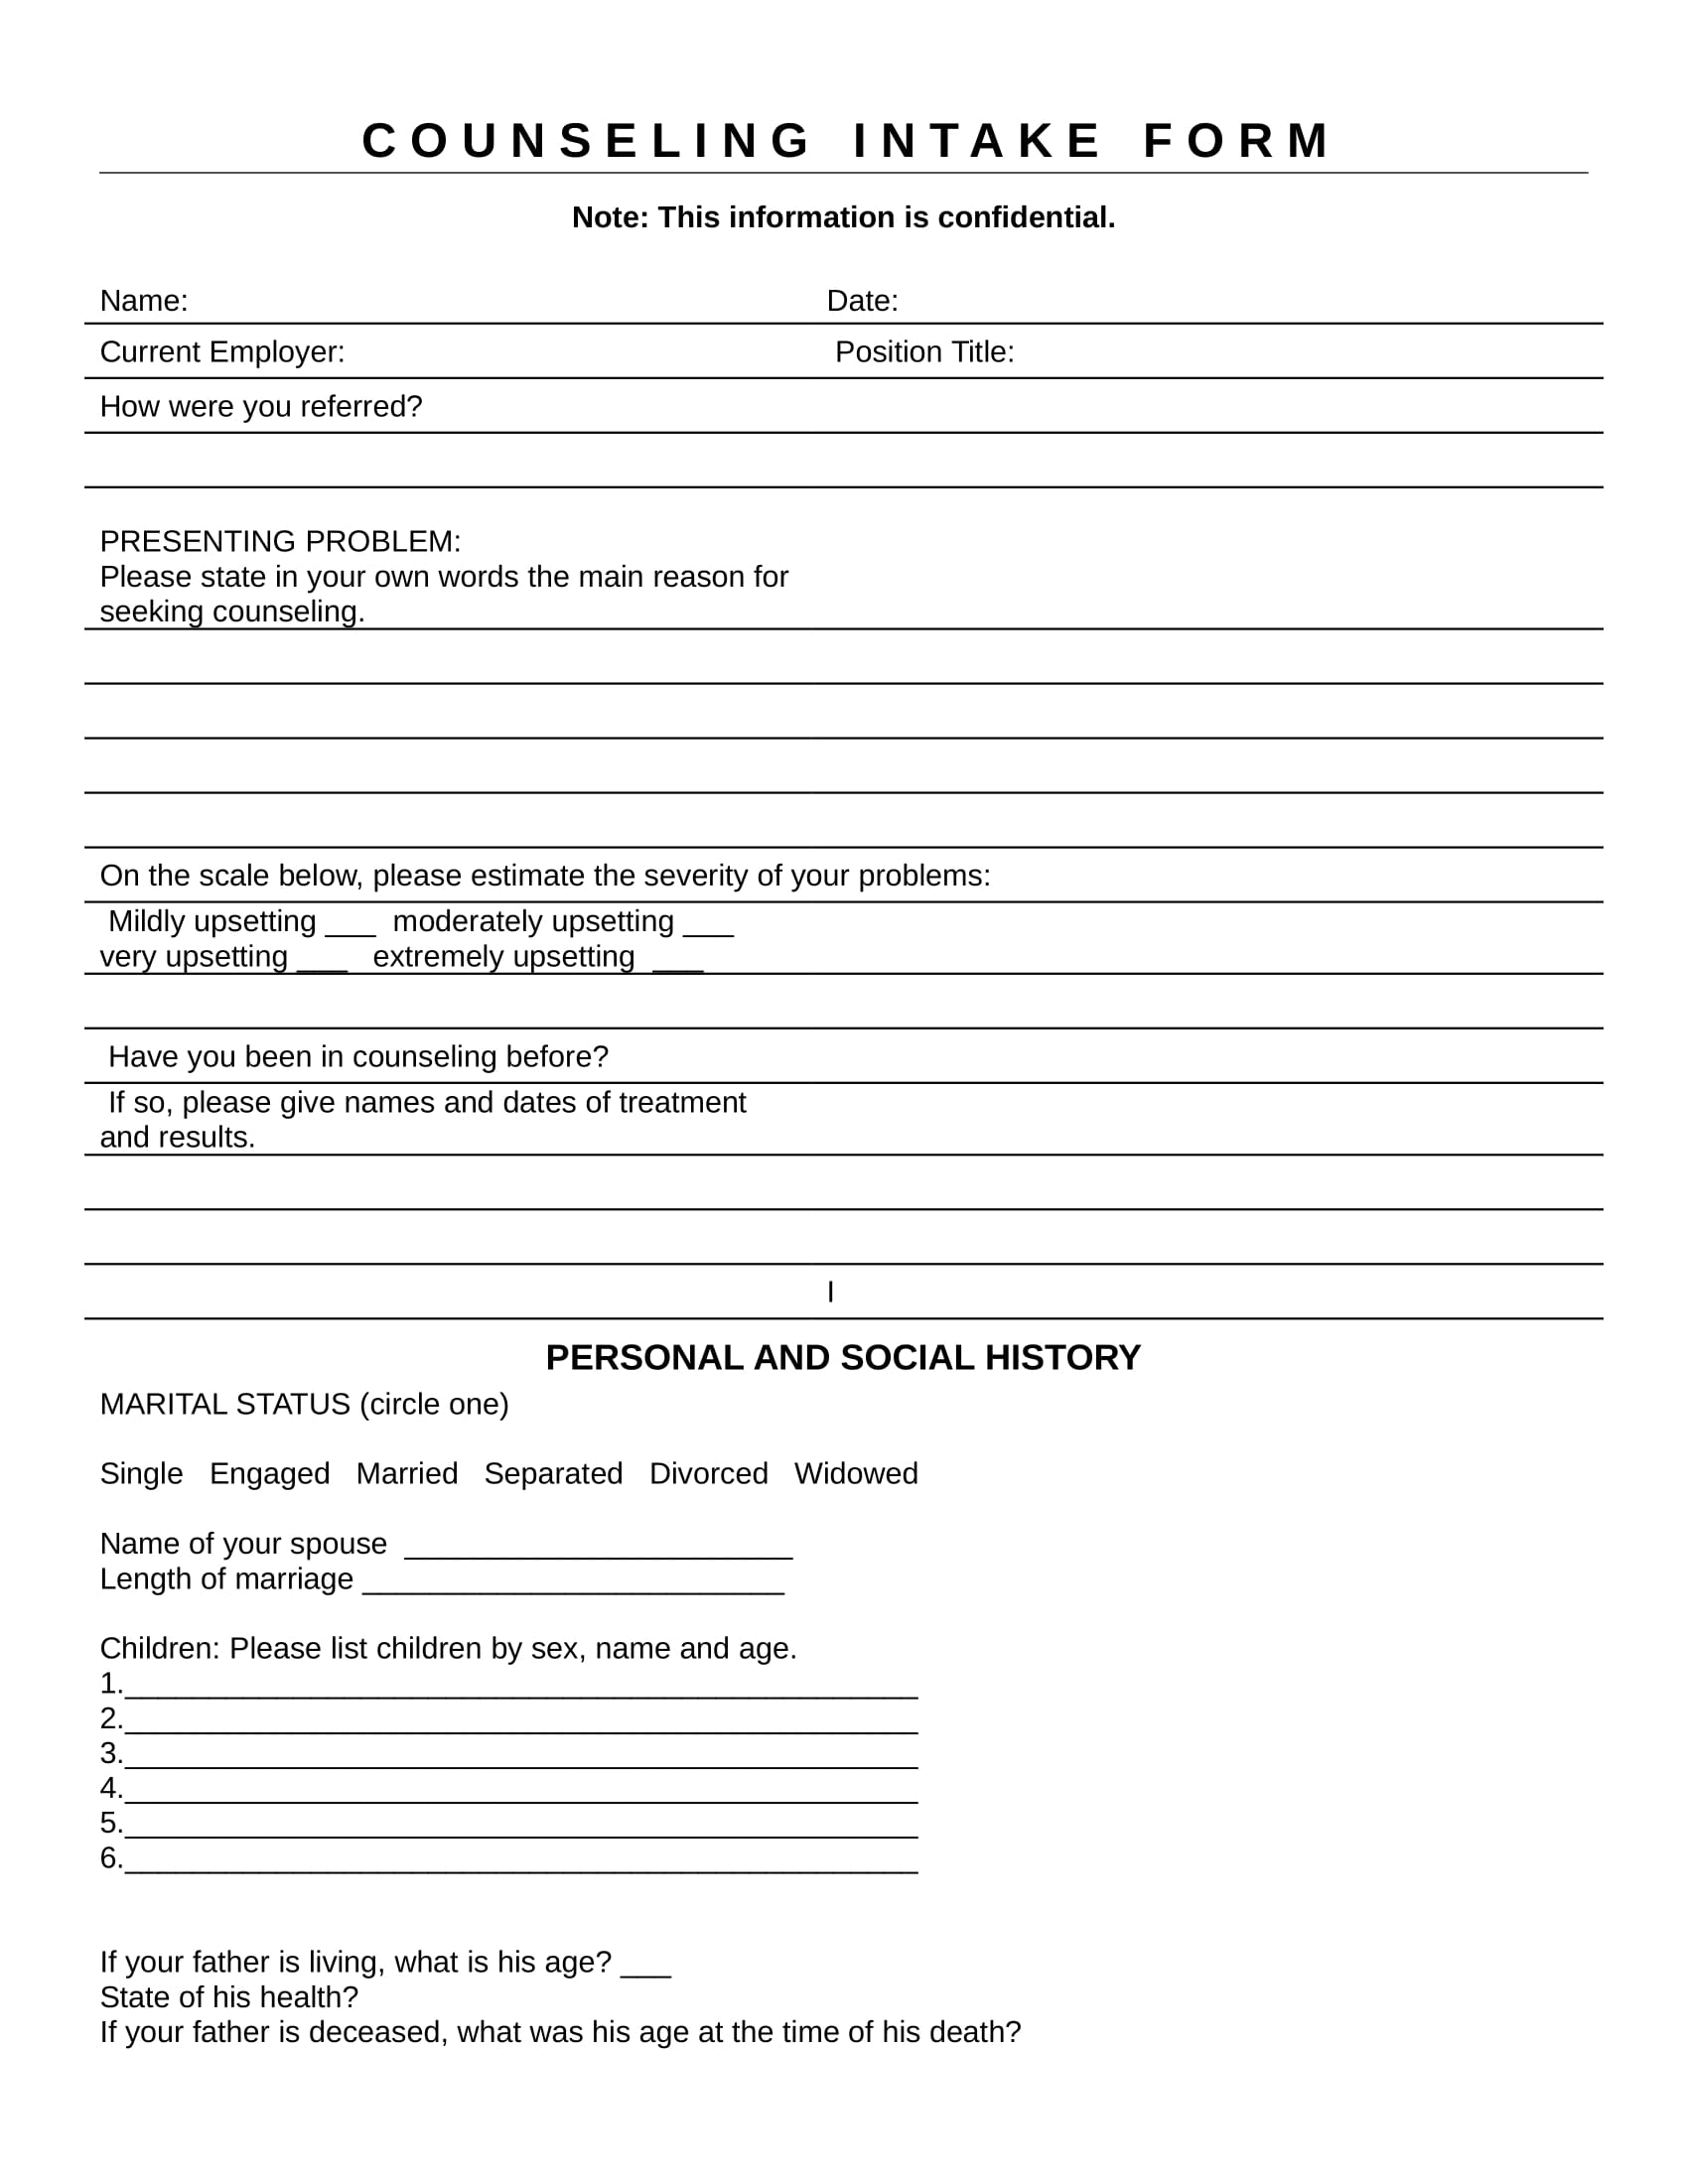 counseling intake form in doc 1